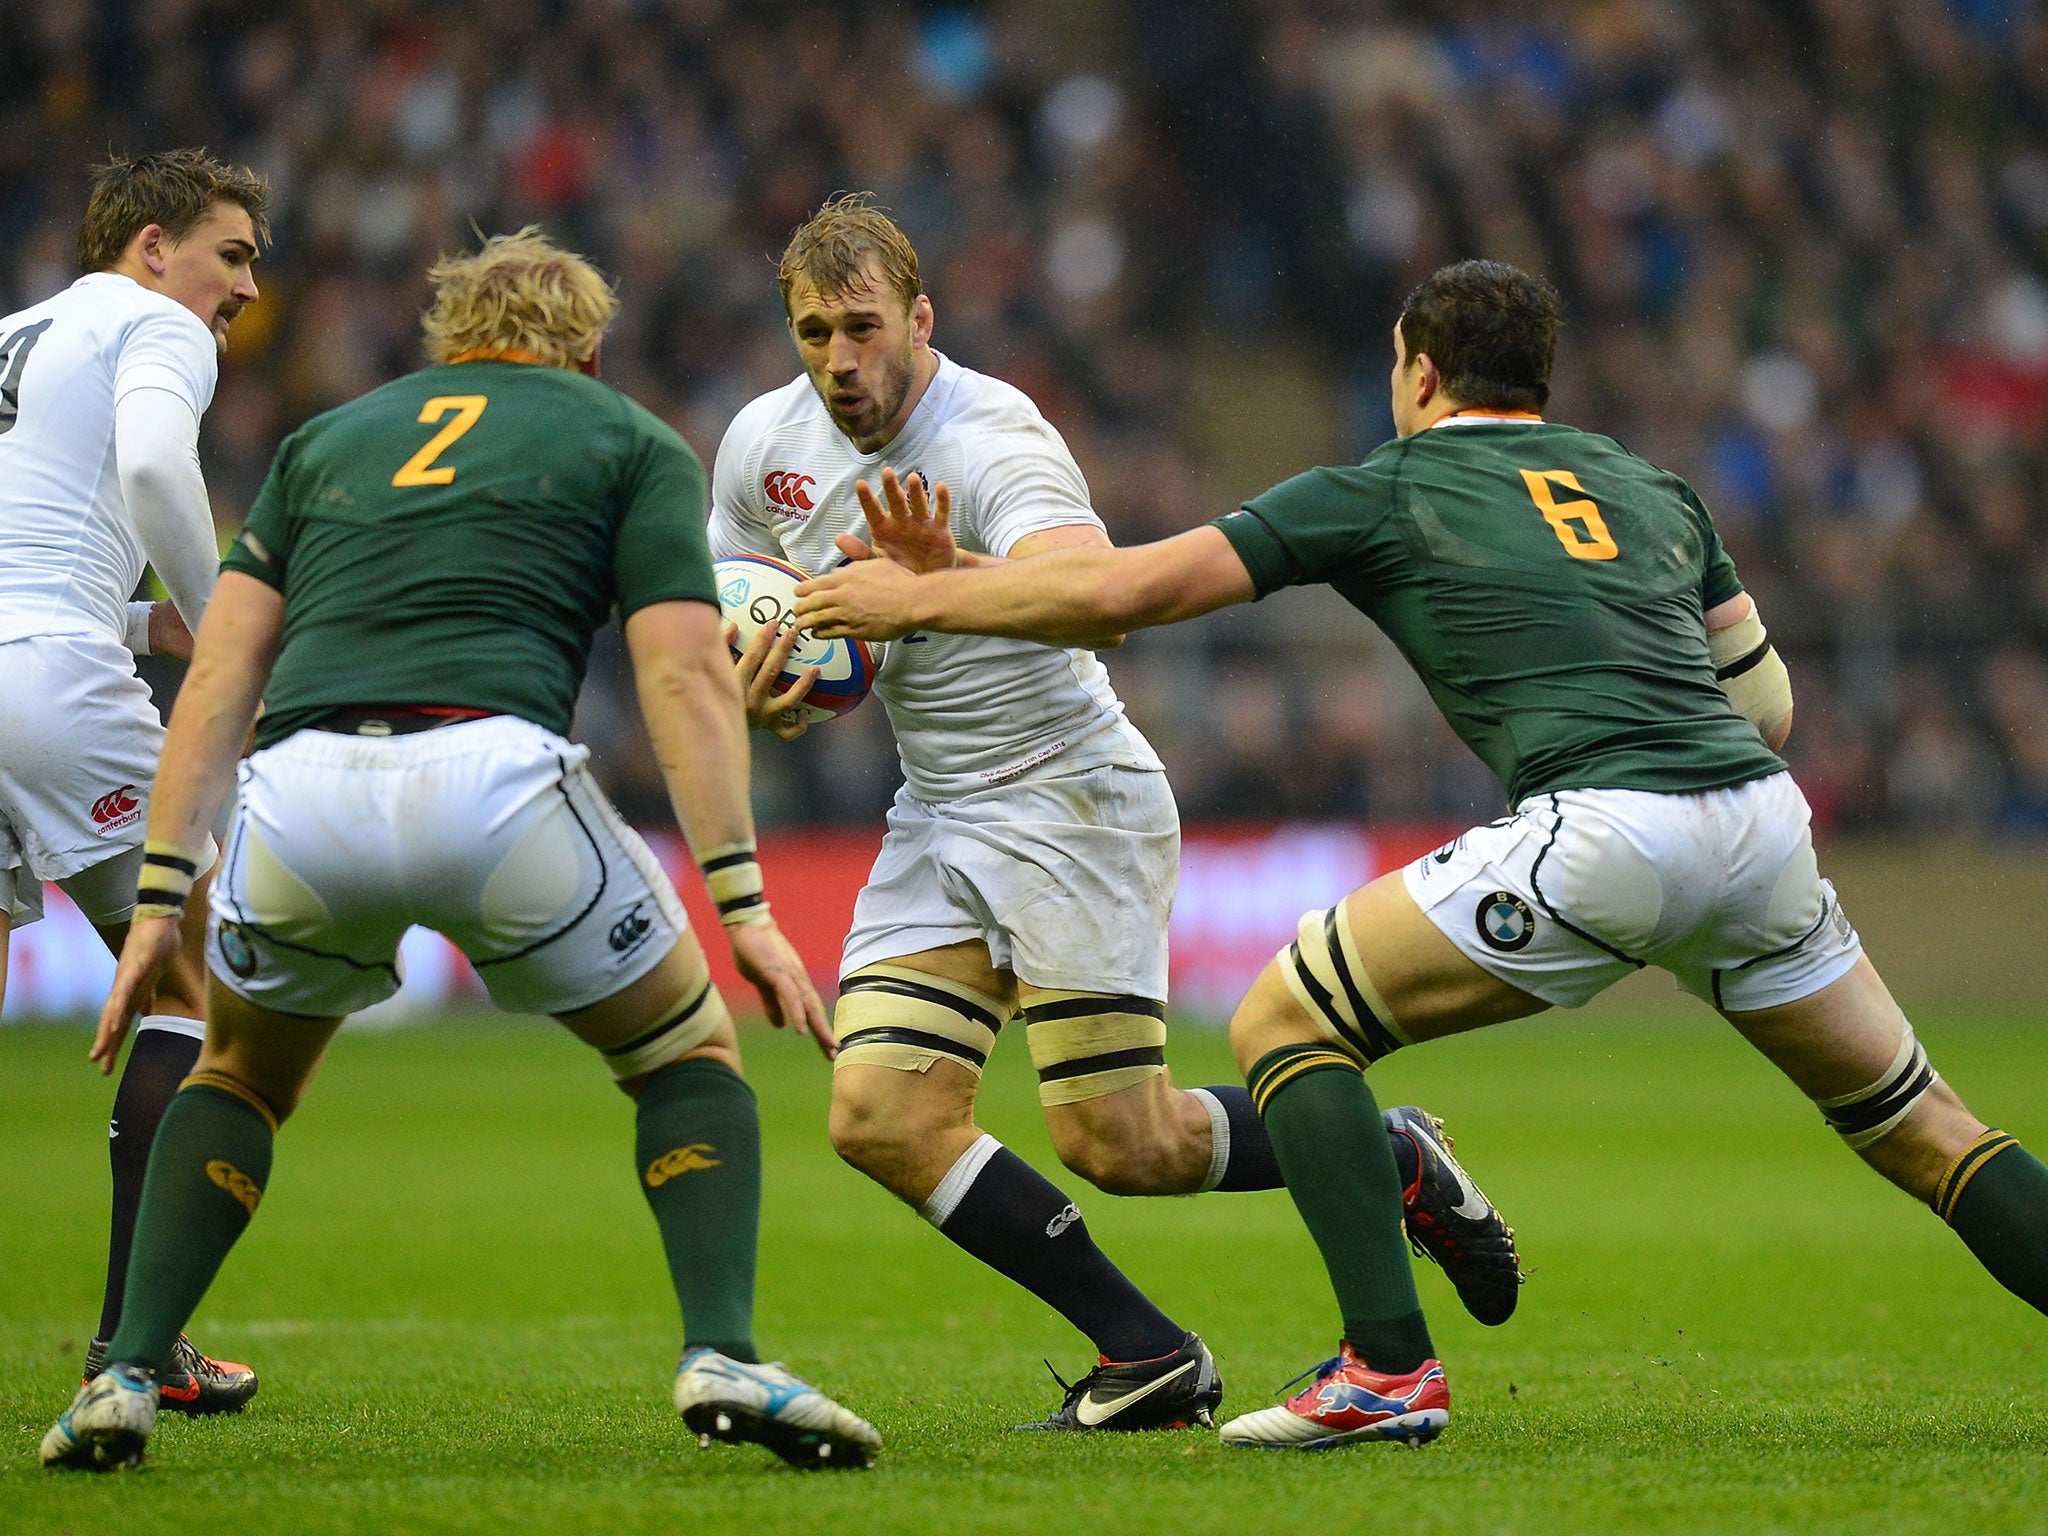 Chris Robshaw is looking for his first win over South Africa